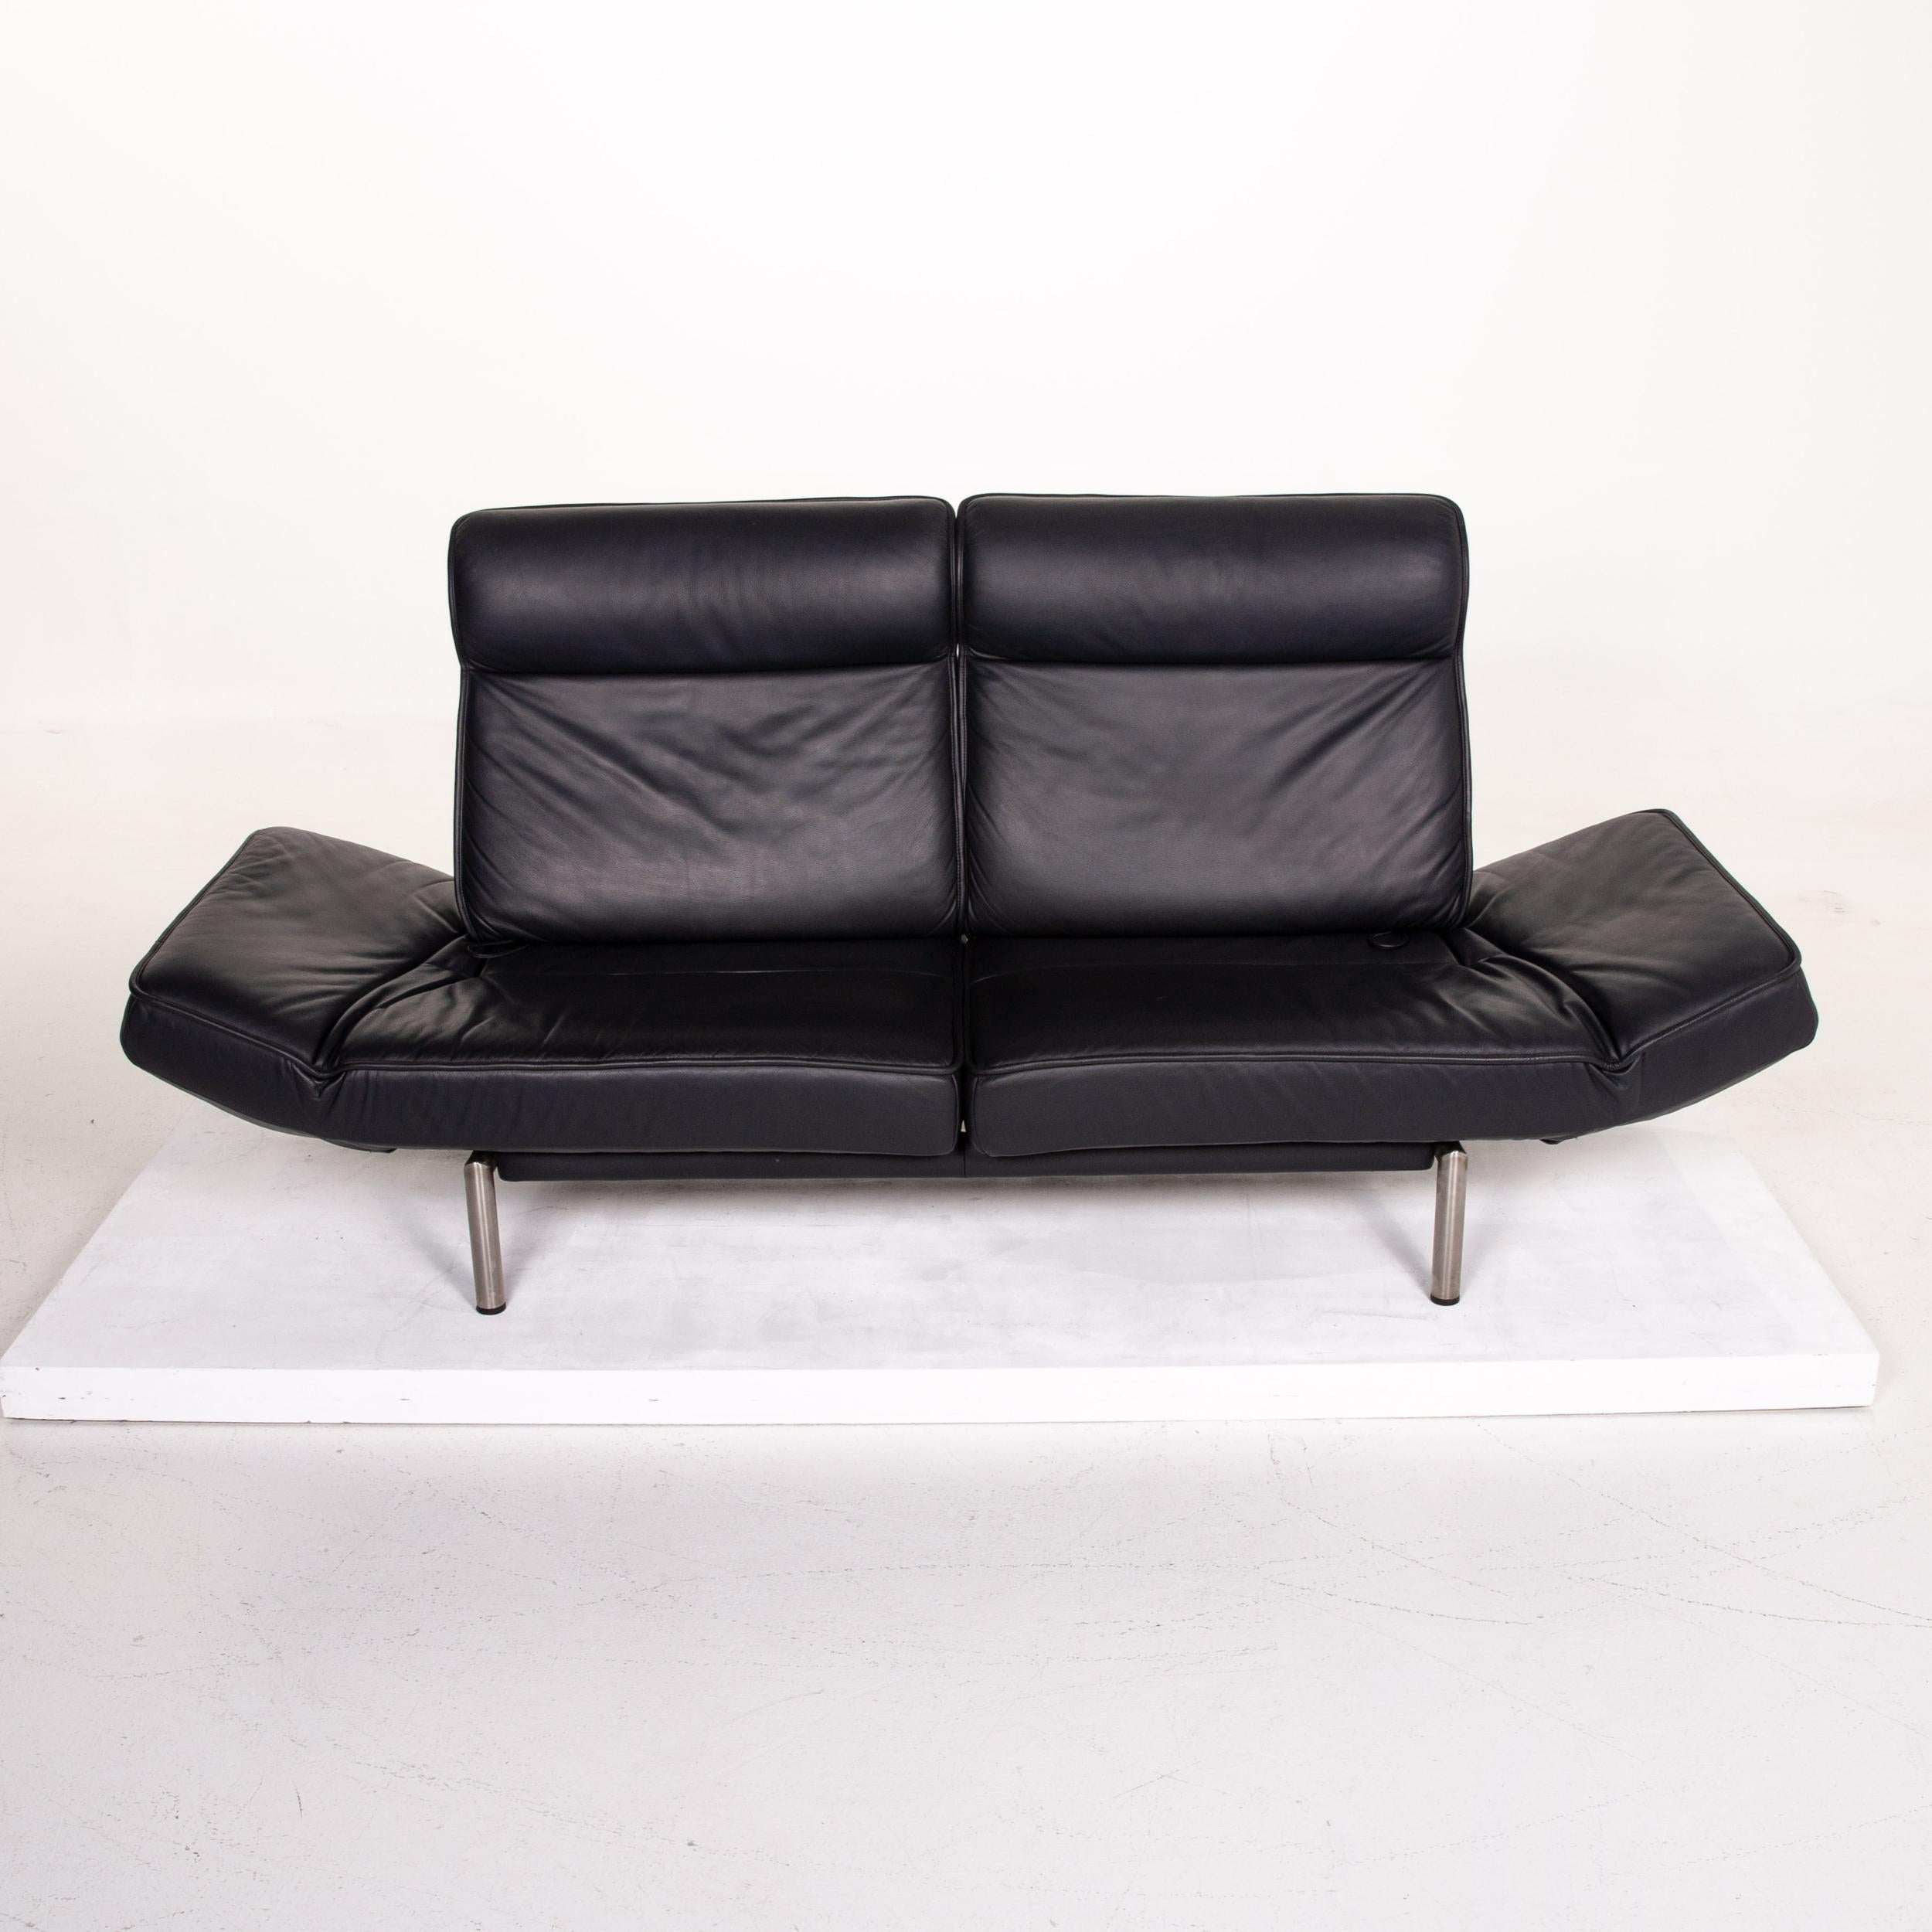 De Sede DS 450 Leather Sofa Black Two-Seat Function Relax Function Couch 4